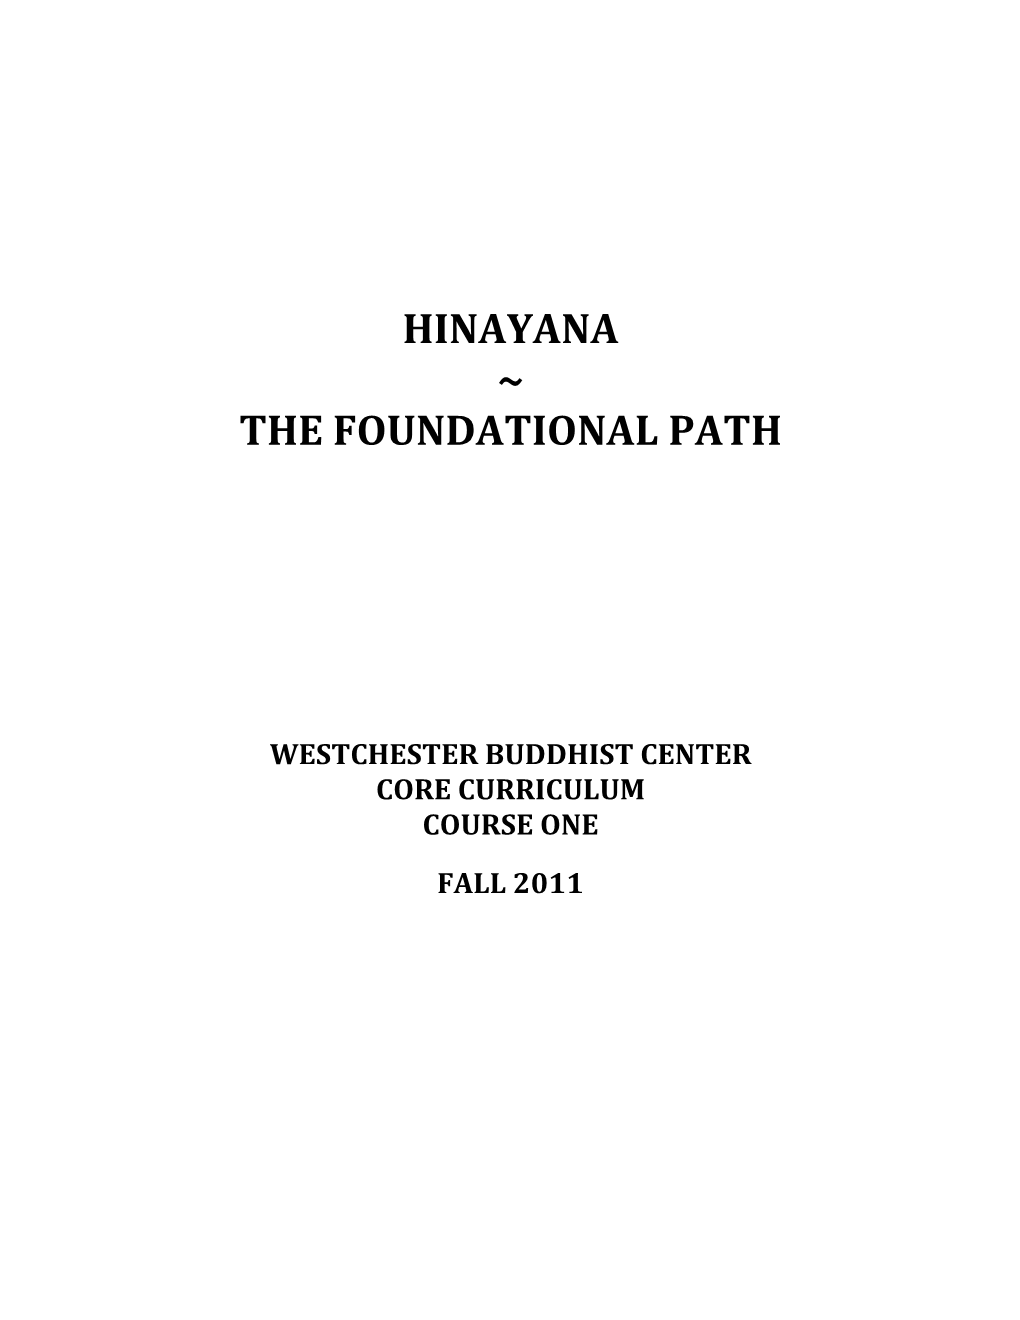 The Foundational Path